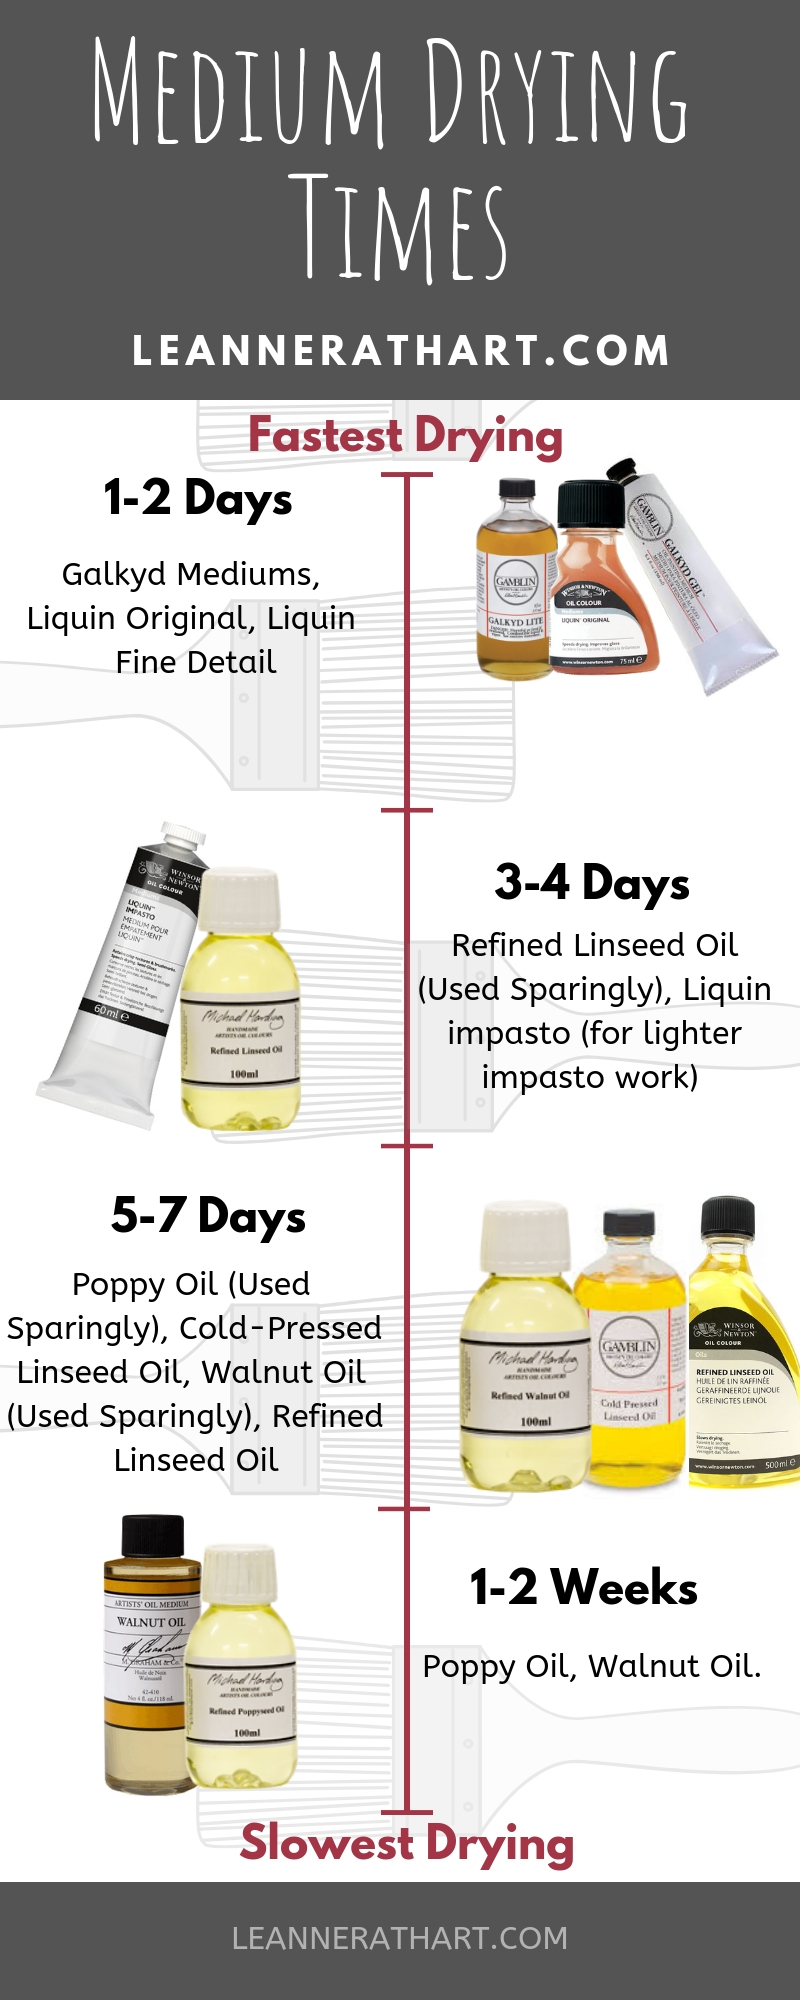 What is linseed oil and what is it used for?, Painting